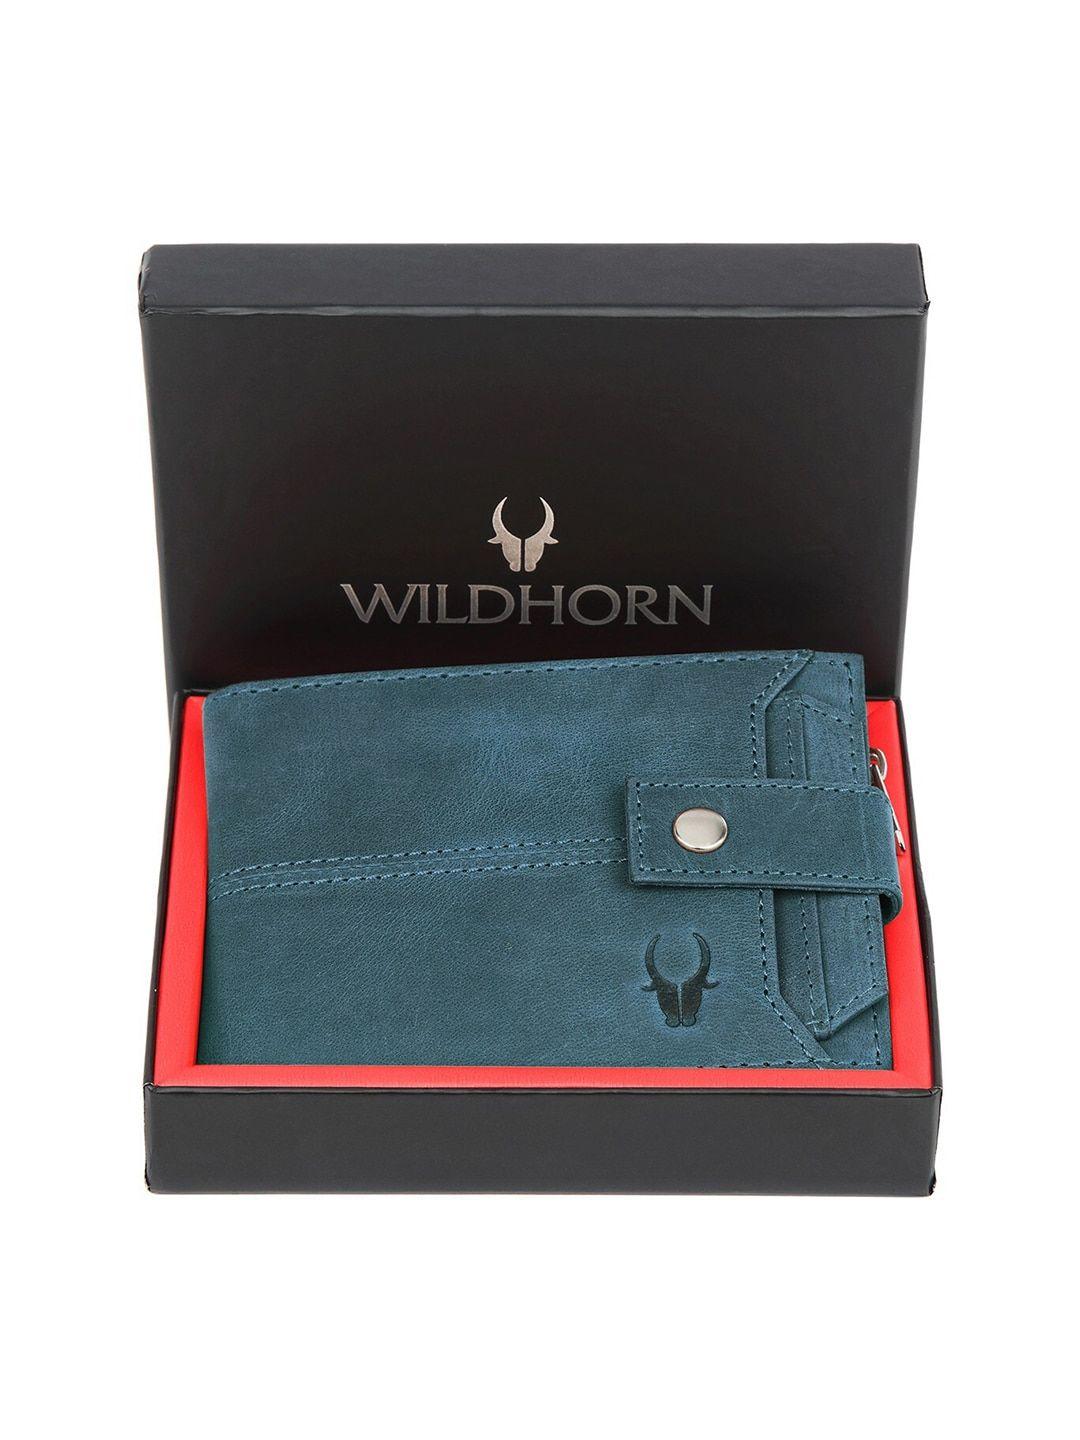 wildhorn men blue leather two fold wallet with removable card holder